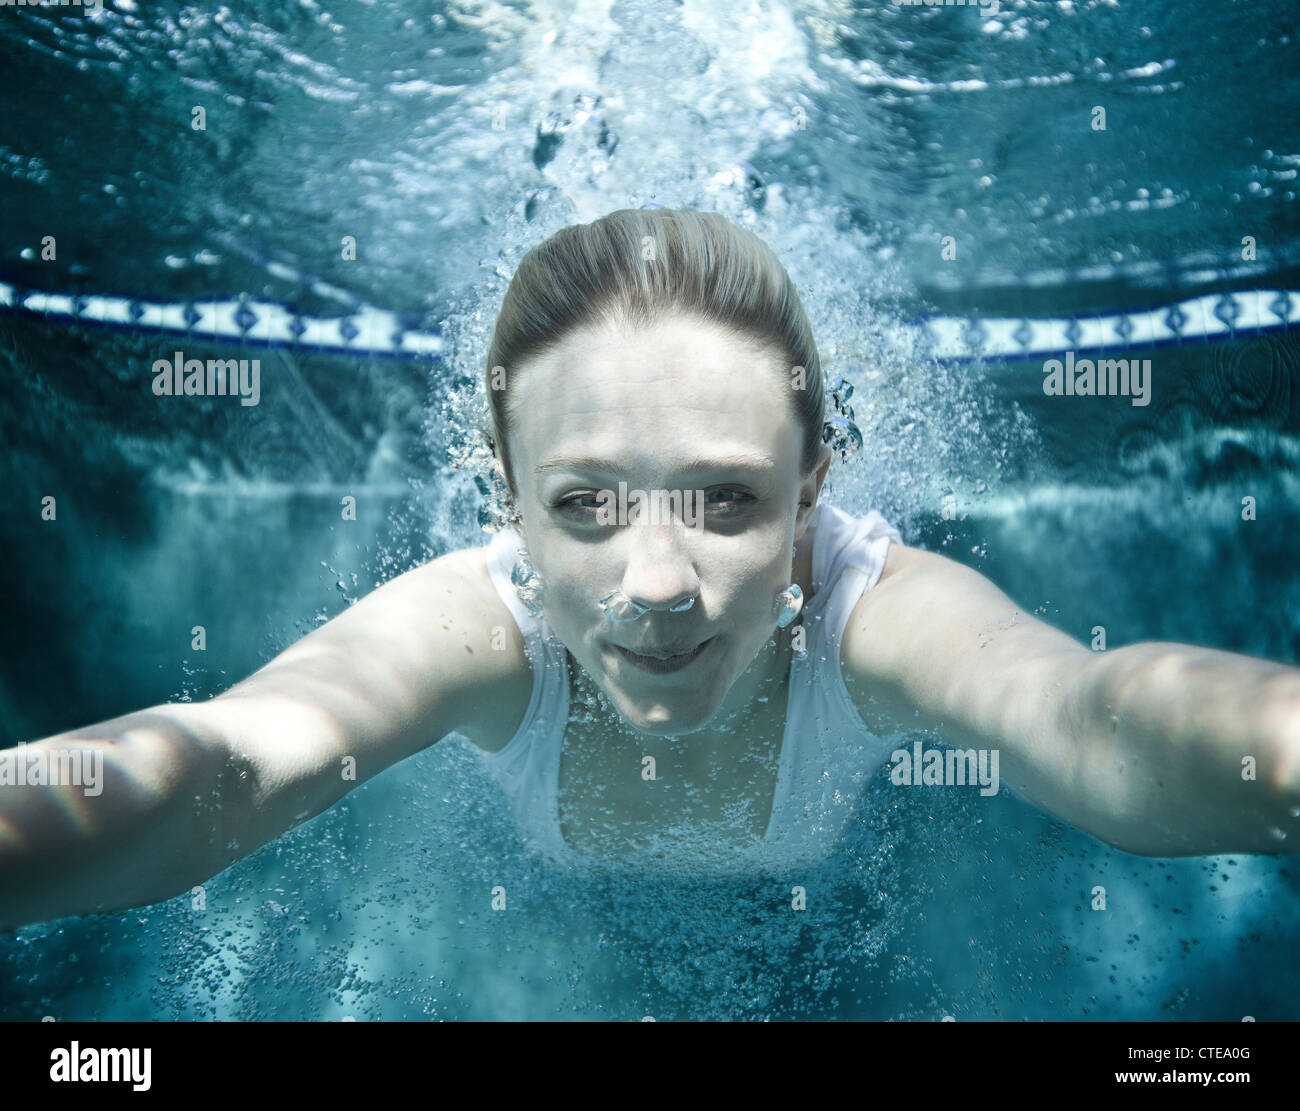 Girl swims towards camera after diving into a pool. Stock Photo